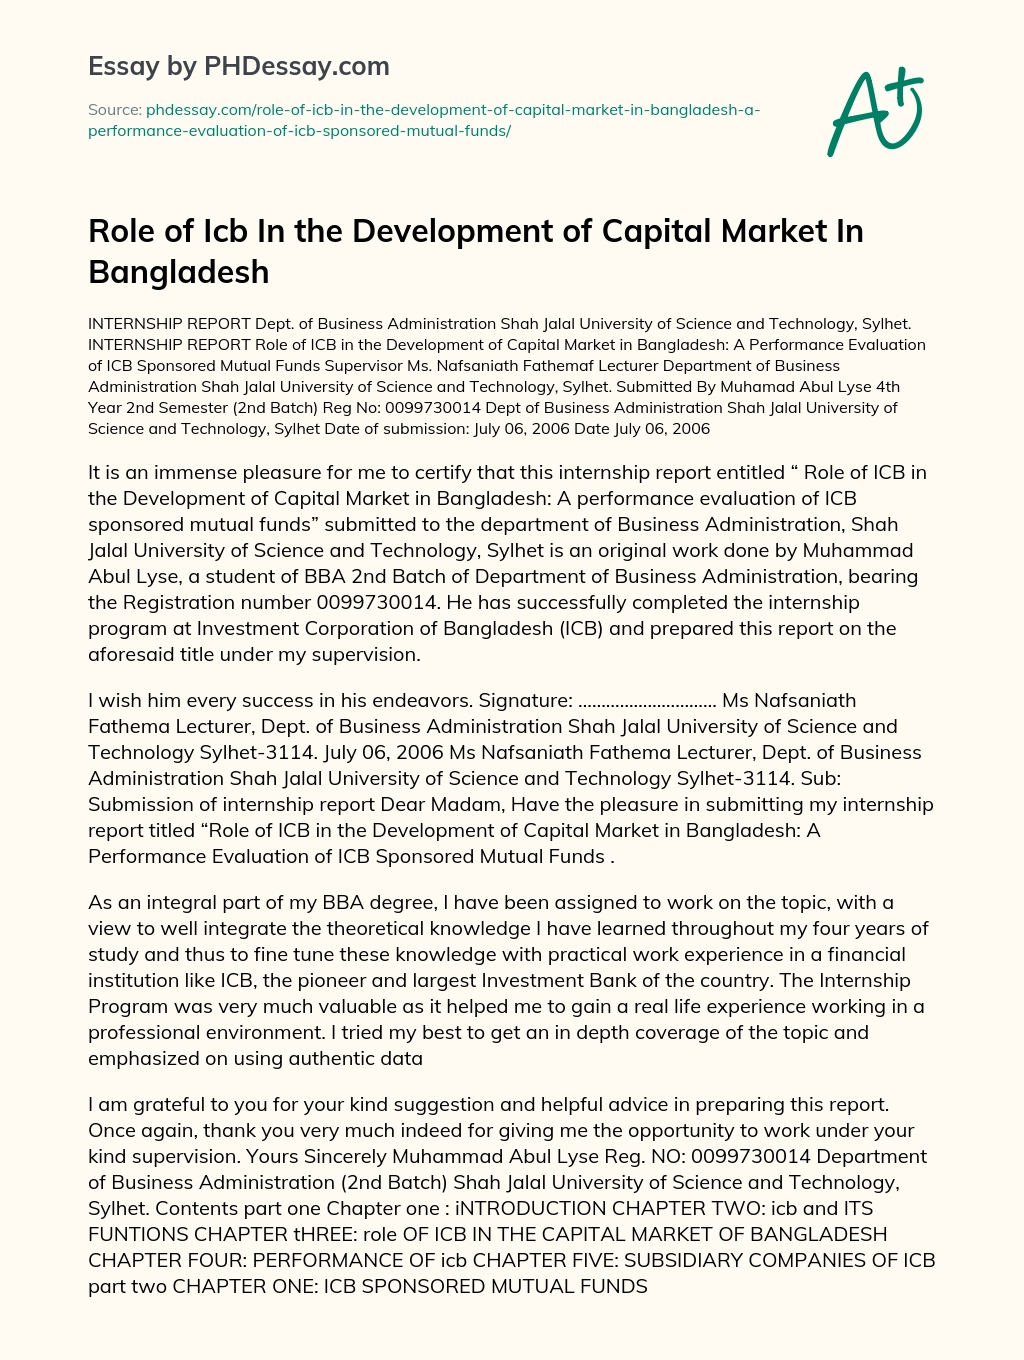 Role of ICB In the Development of Capital Market In Bangladesh essay